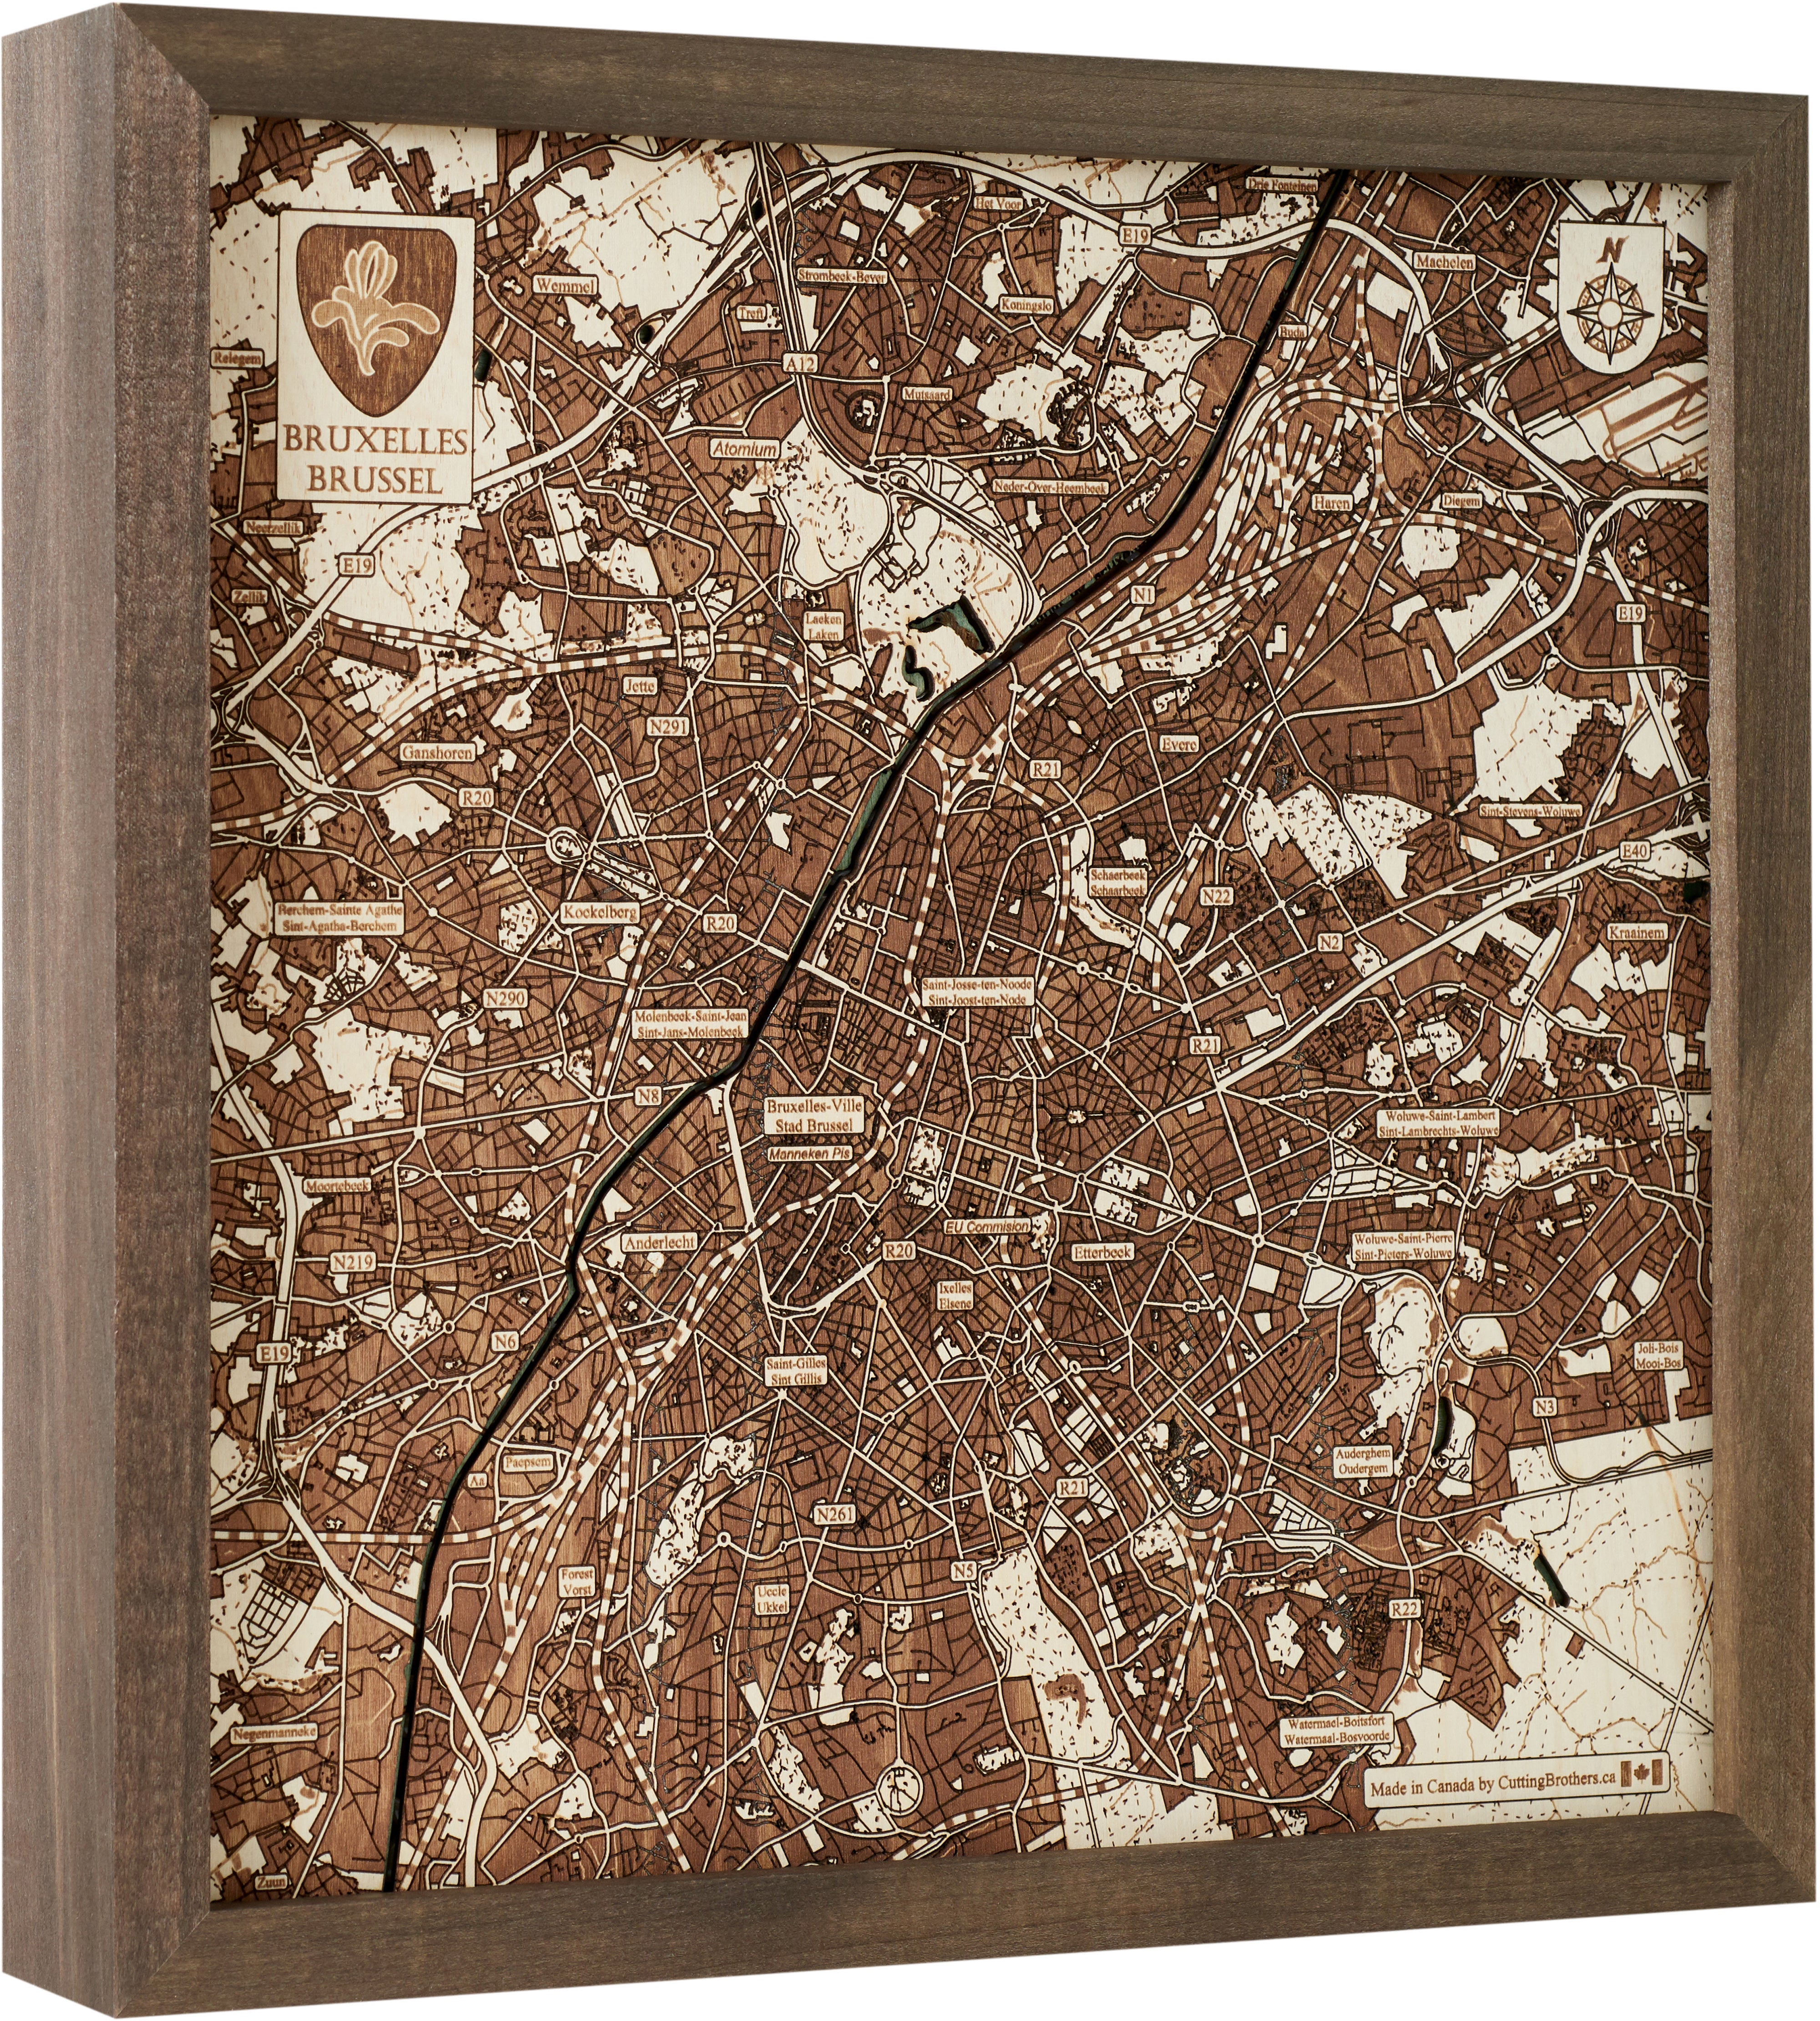 BRUSSELS 3D Wooden Wall Map - Version S